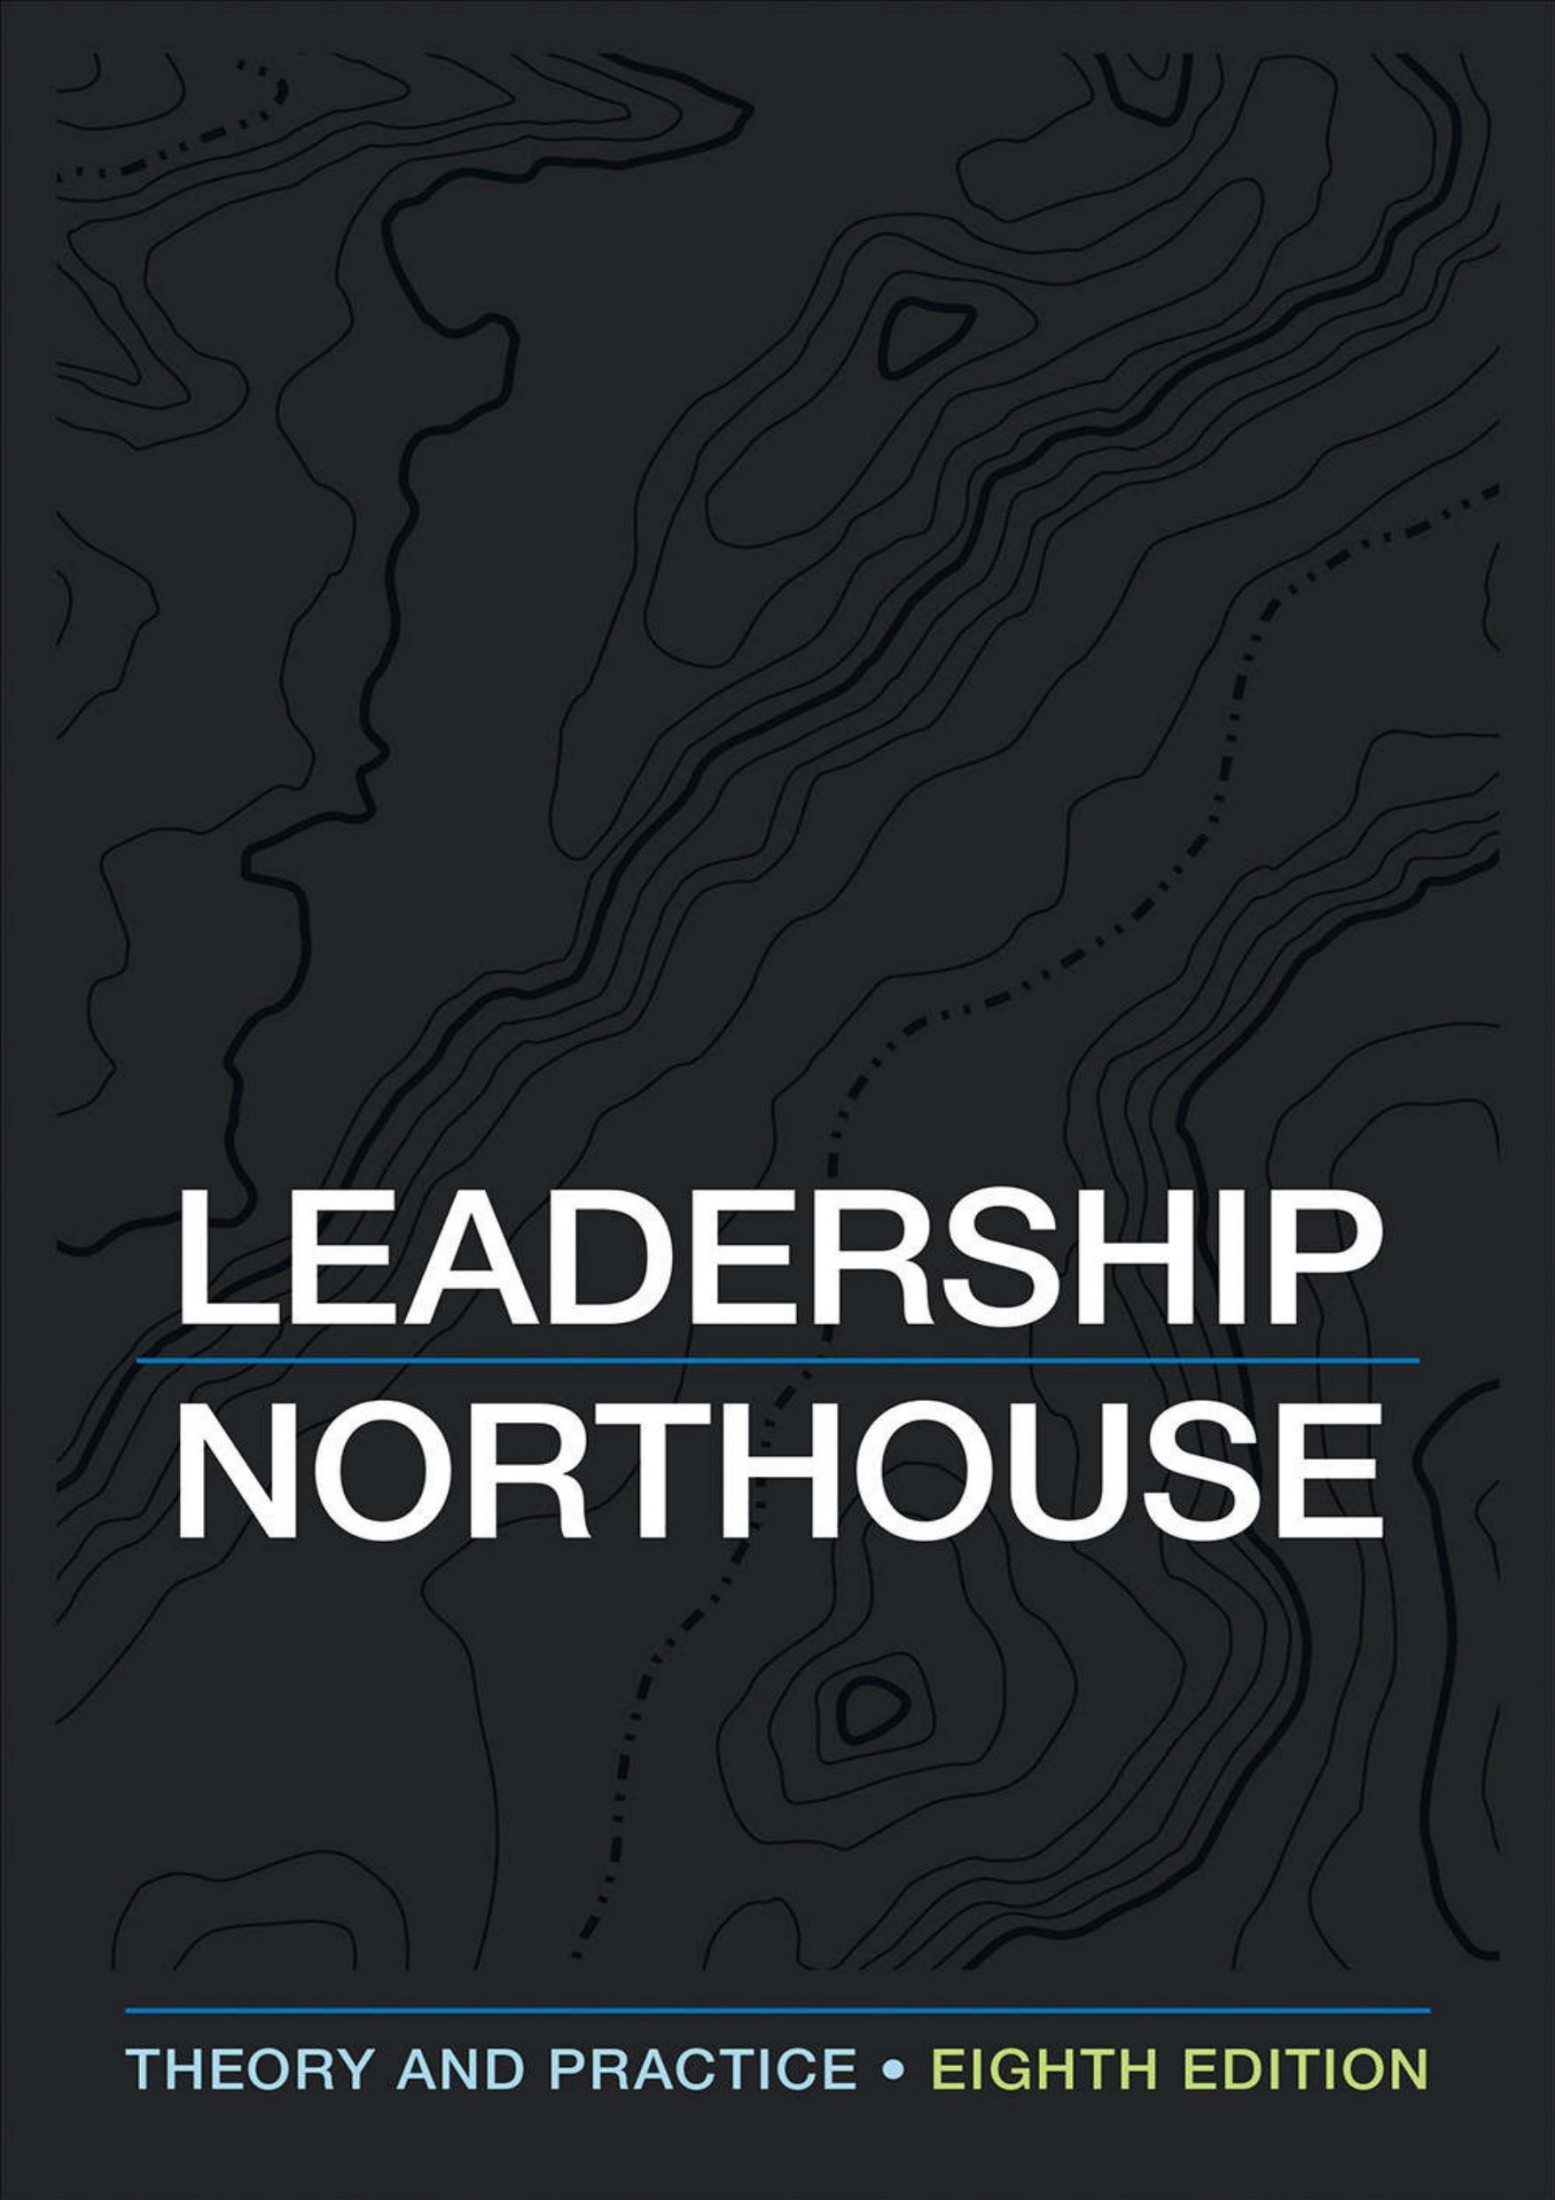 Leadership Theory and Practice 8th Edition Northouse - Peter G. Northouse.jpg